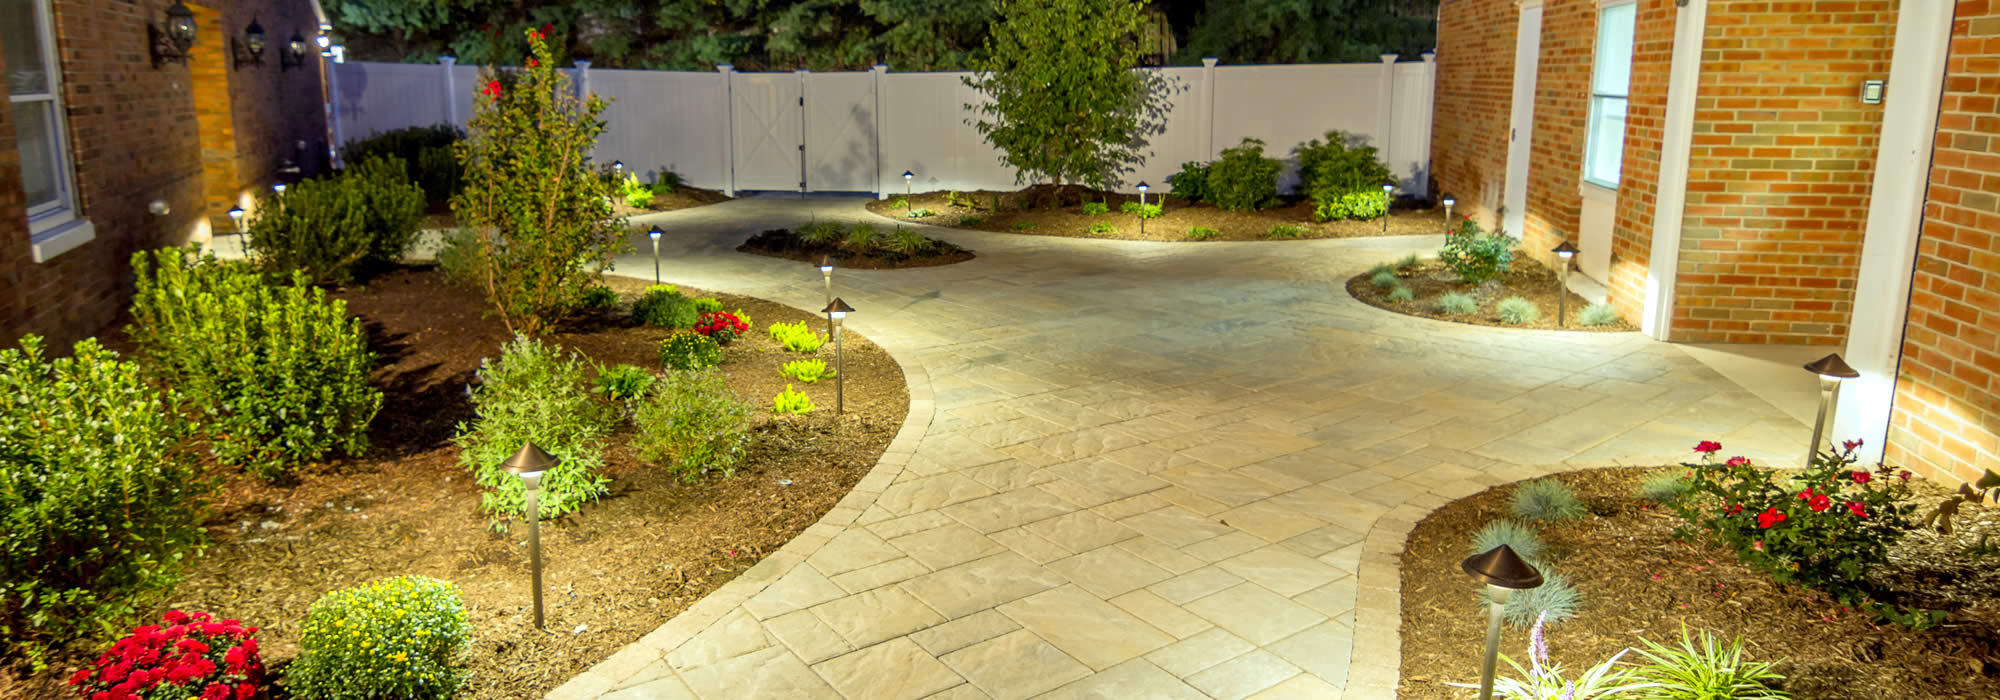 Landscaping Services in Cambridge